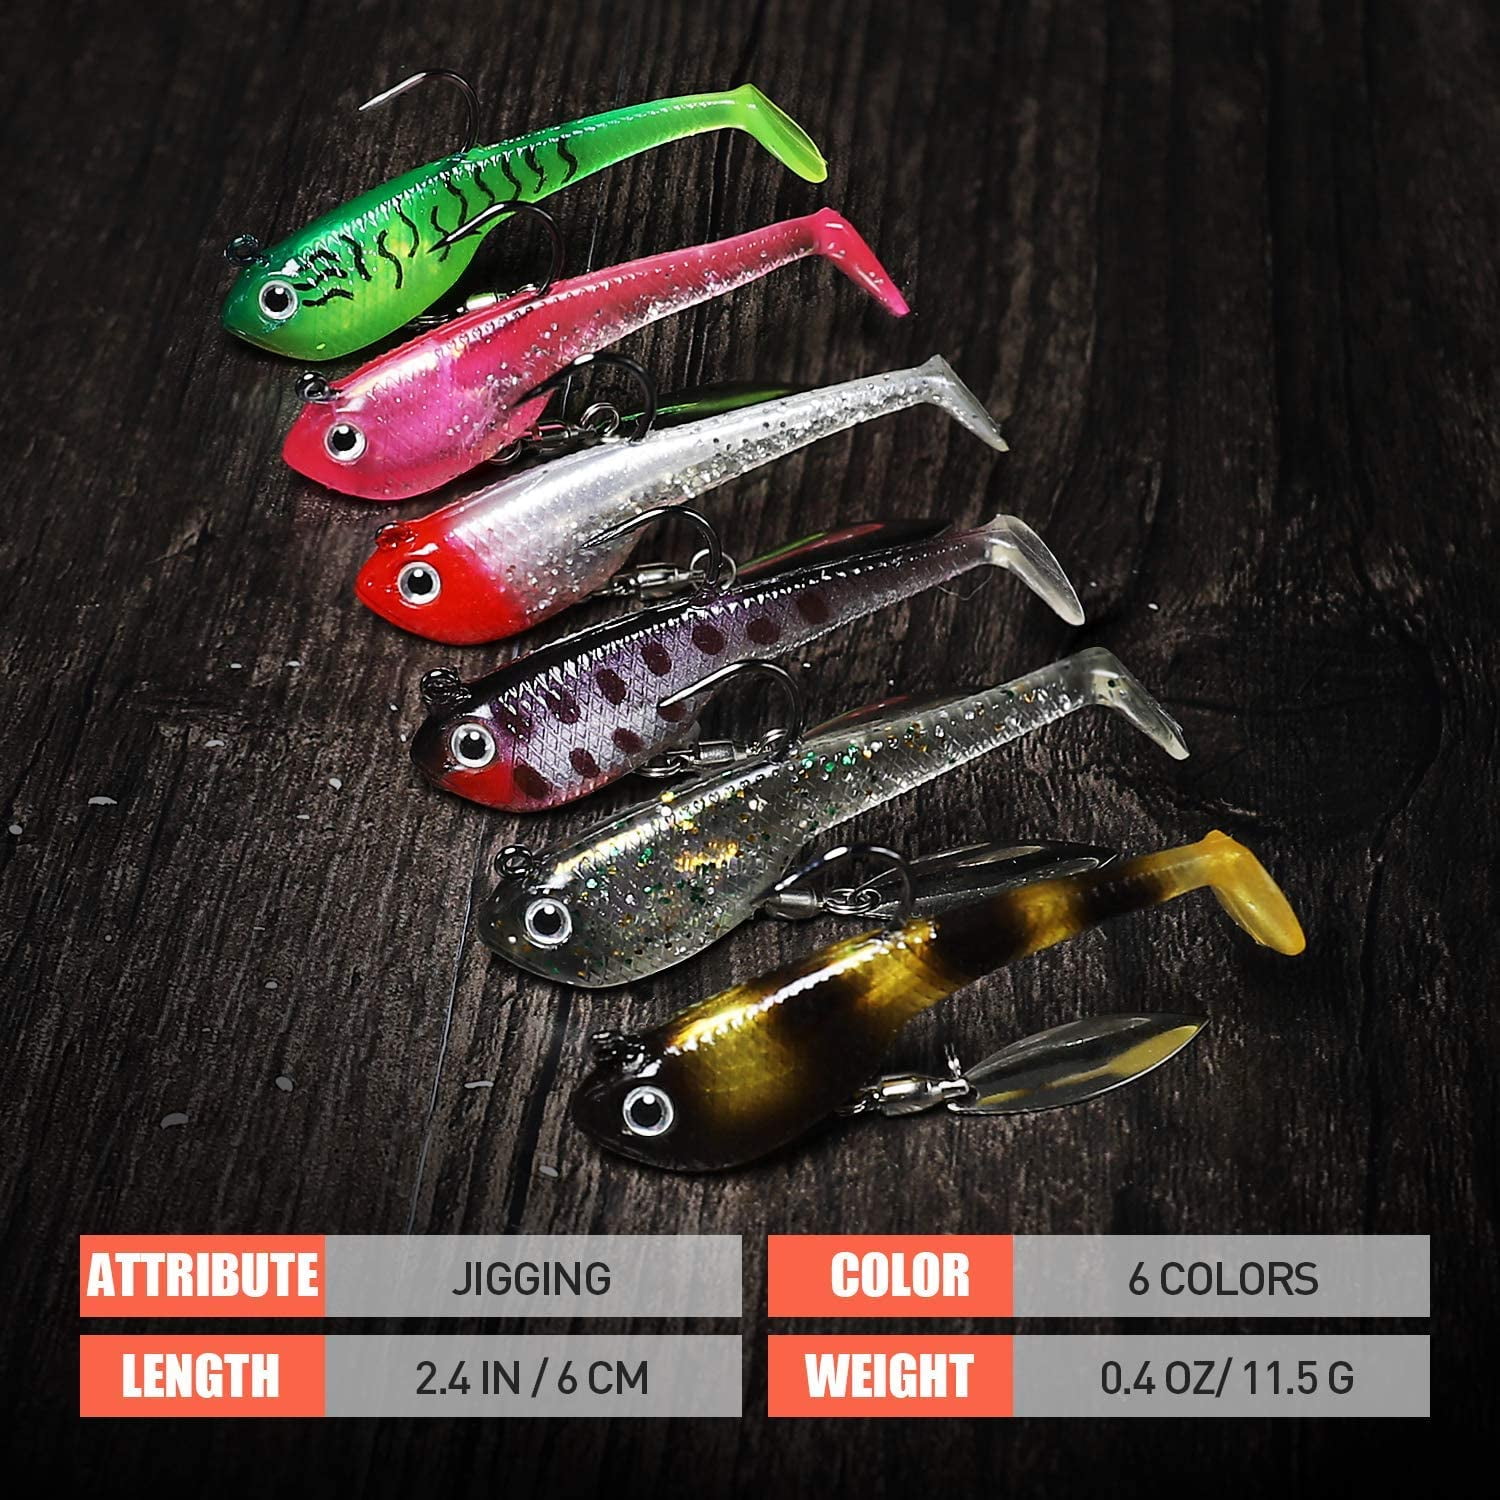 TRUSCEND Fishing Lures for Bass Trout Japan Formula Jighead Lures Paddle Tail Swimbaits Soft Fishing Baits Freshwater Saltwater Jigging Bass Fishing Lures